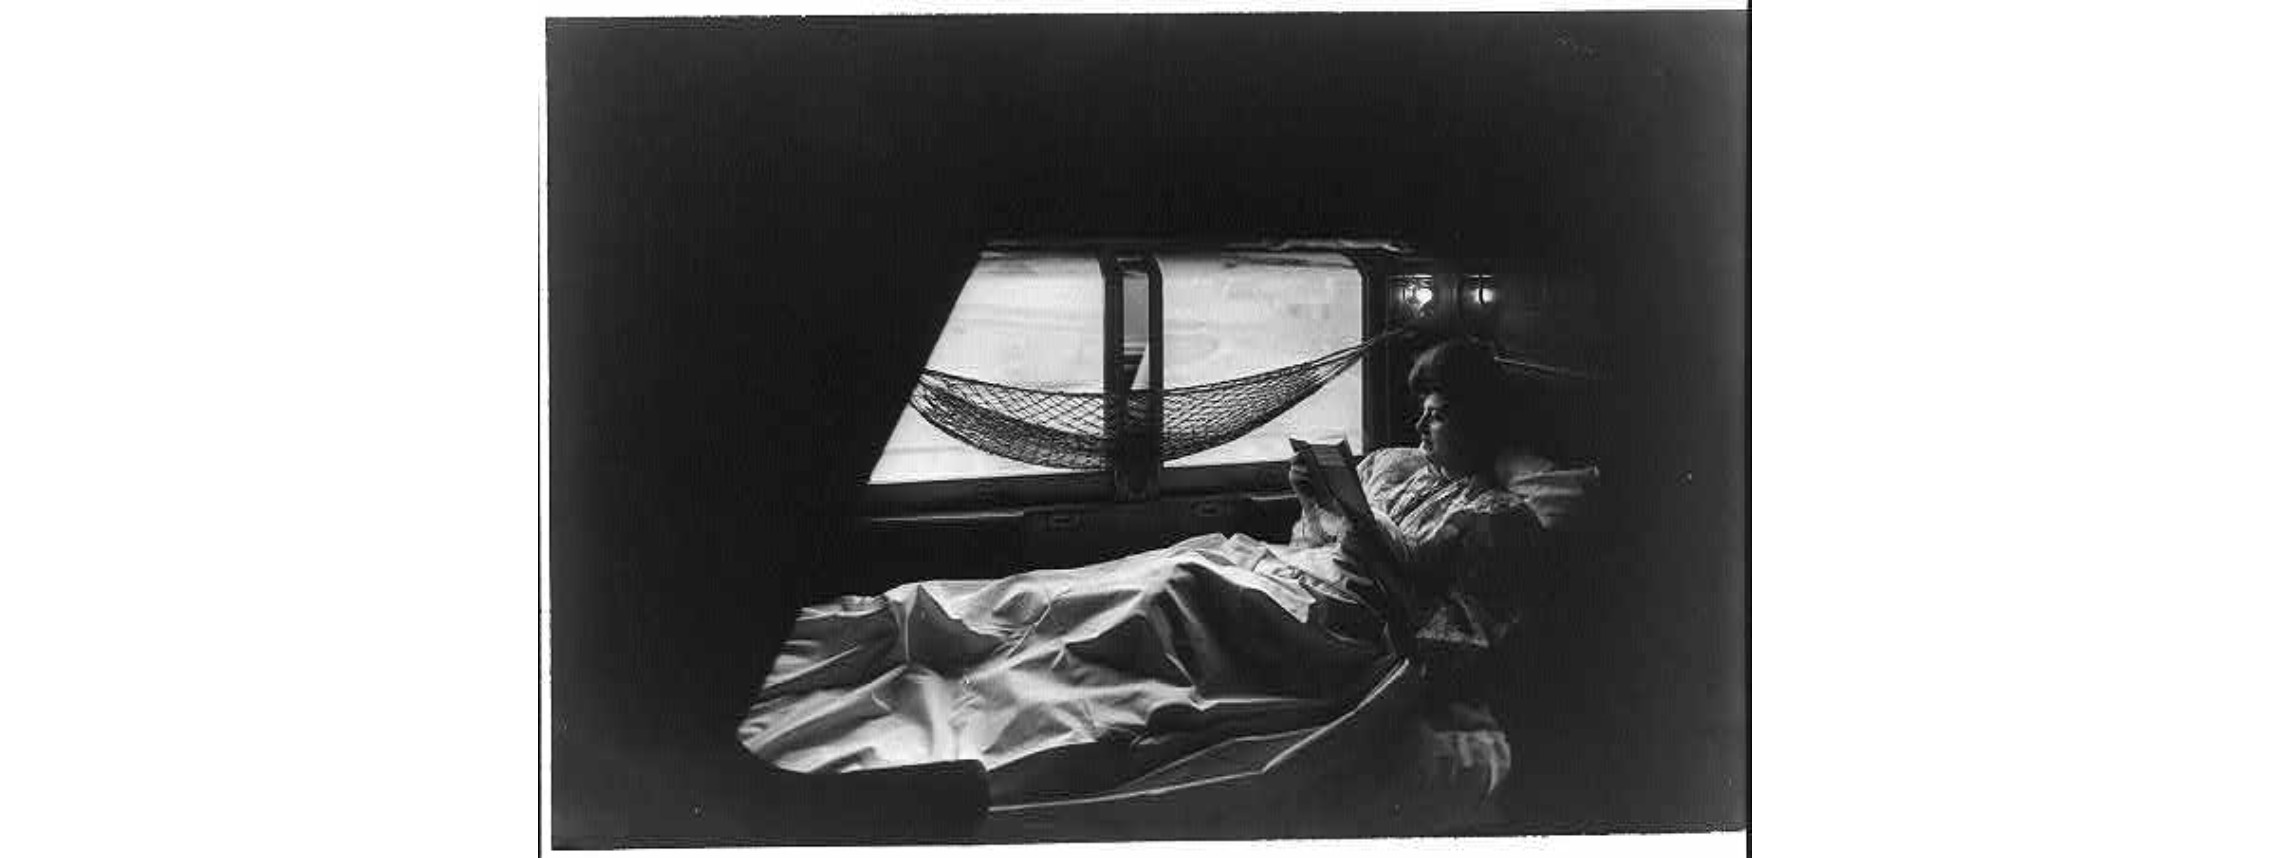 Black and white photo of a woman in early 20th century clothing reading while lying down in a sleeping birth on a train. A small hammock for belongings hands abvoe her.